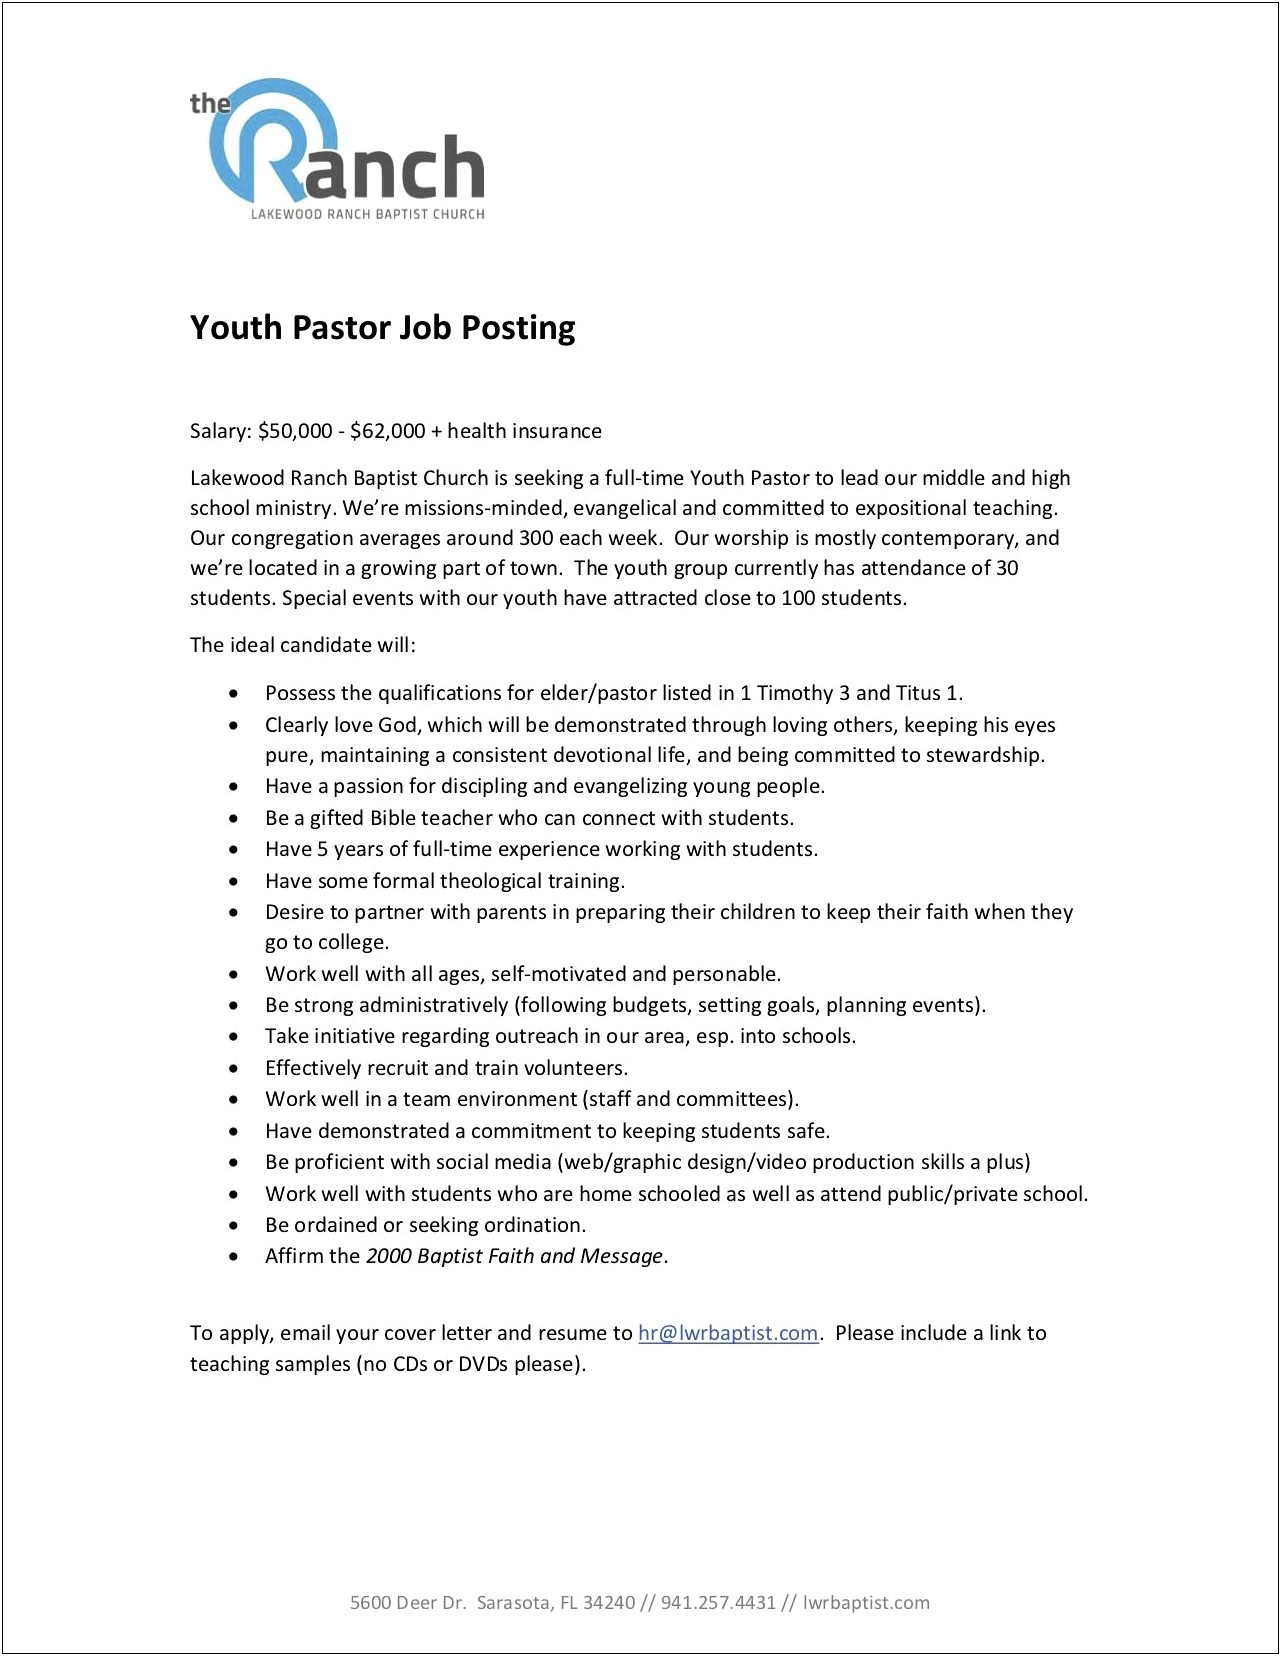 Youth Minister Professional Summary For Resume